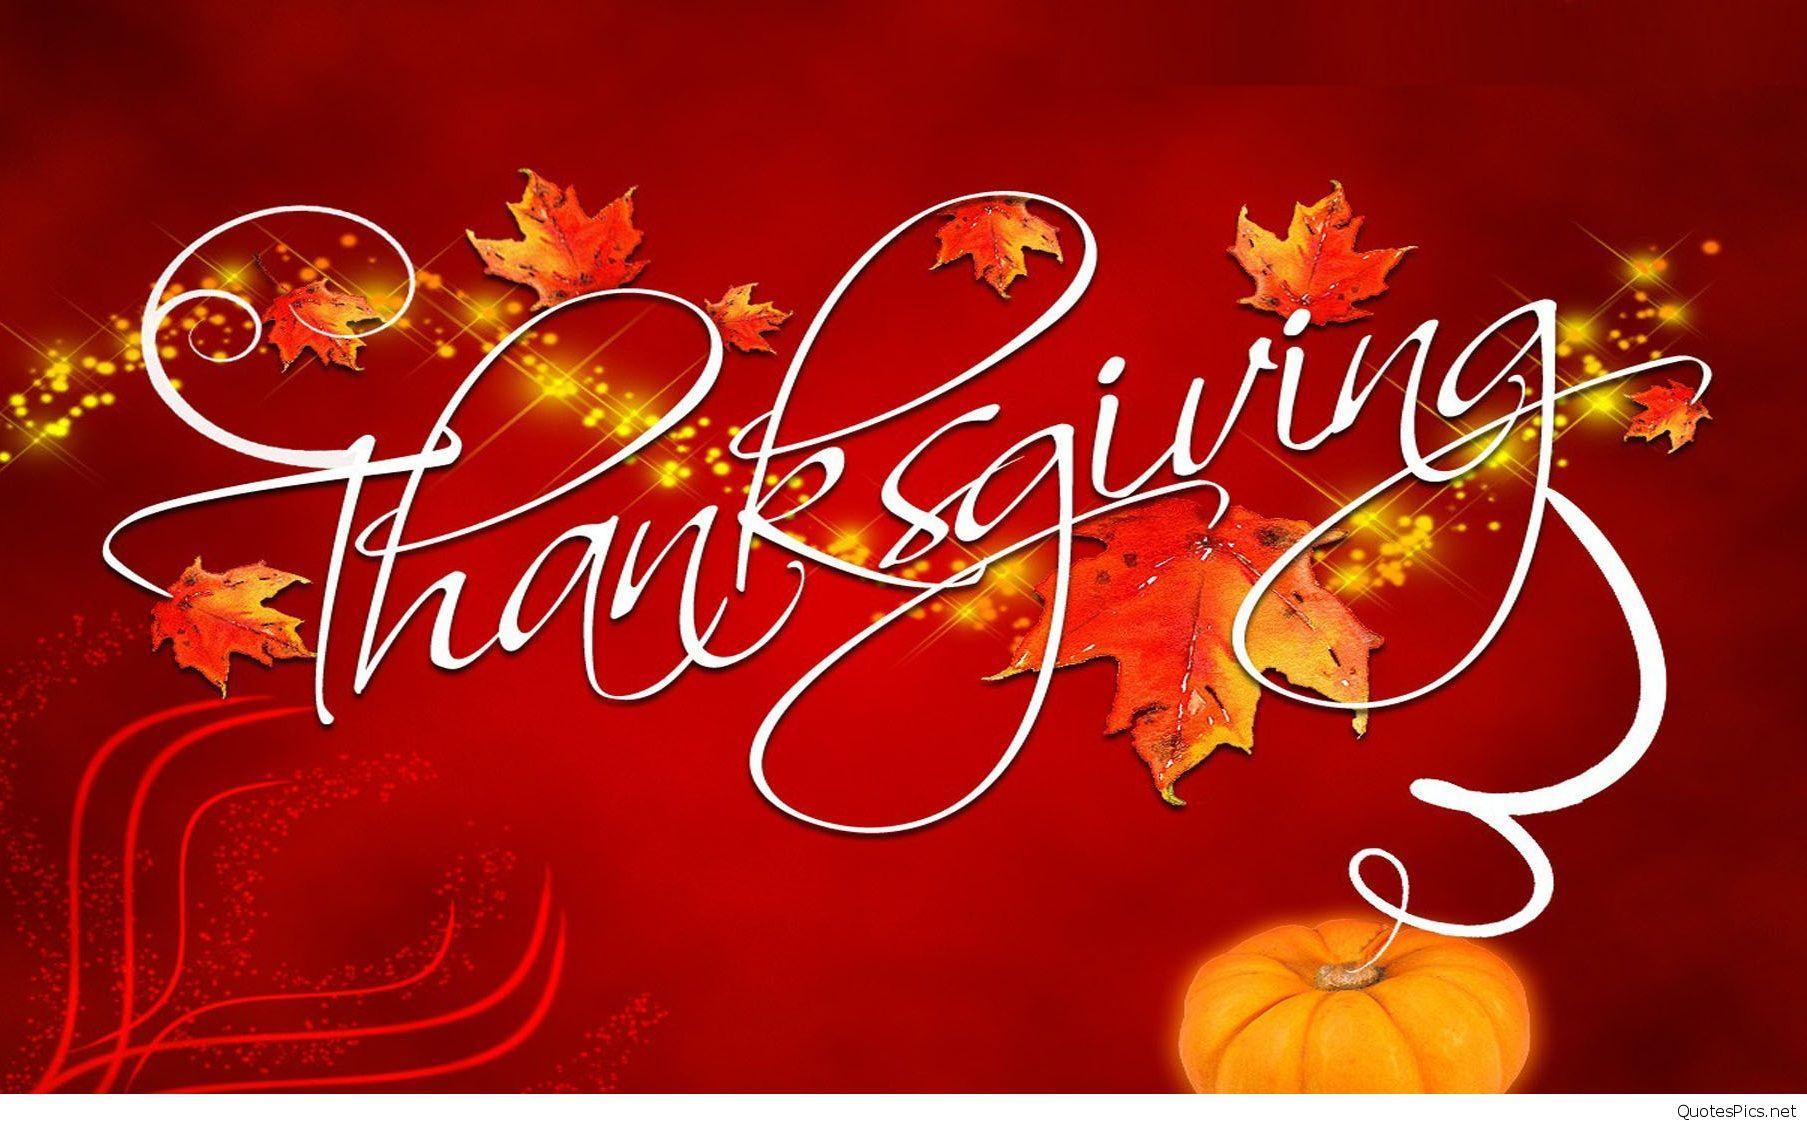 Free* Happy Thanksgiving Day 2017 Image For Facebook. Happy